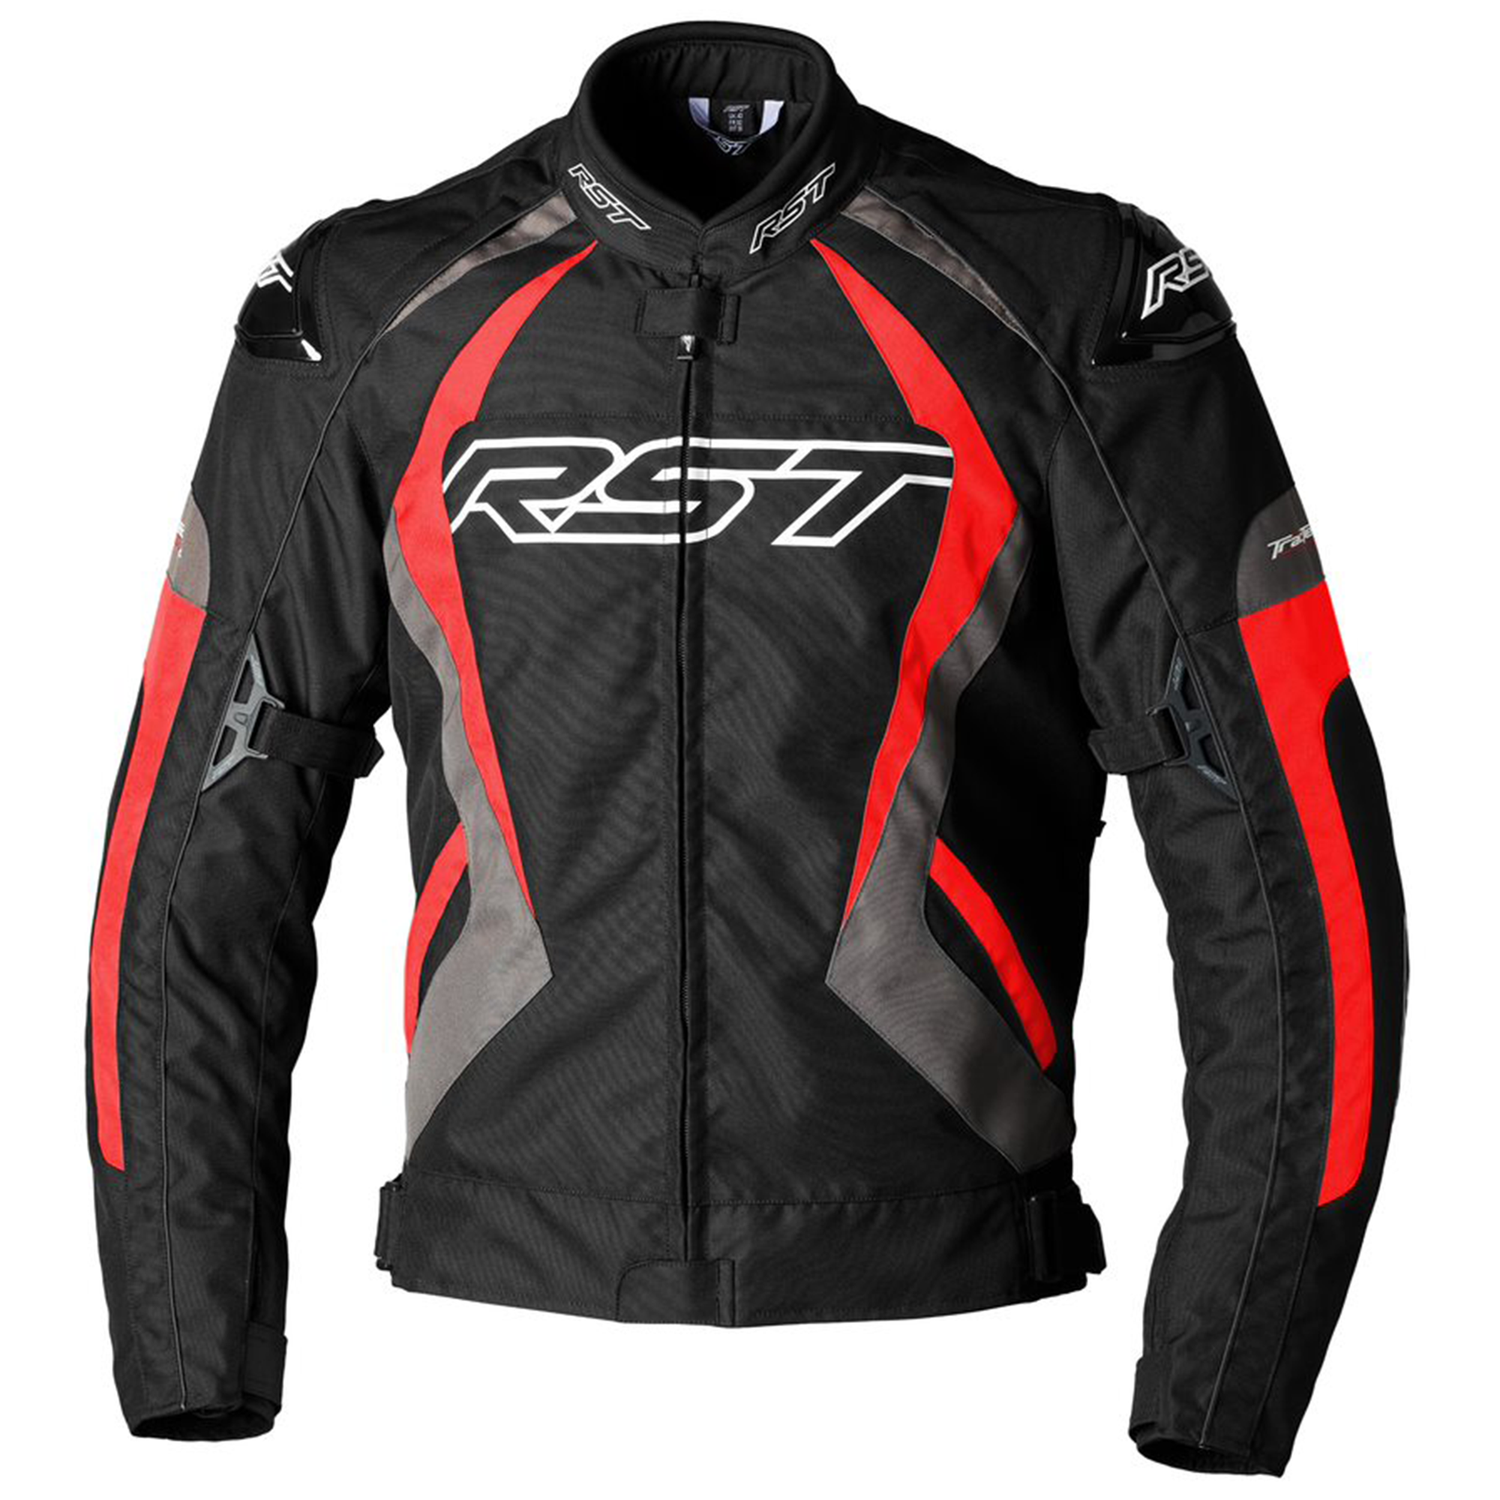 RST Tractech Evo 4 CE Mens Textile Jacket - Black/Grey/Flo Red (2365 ...